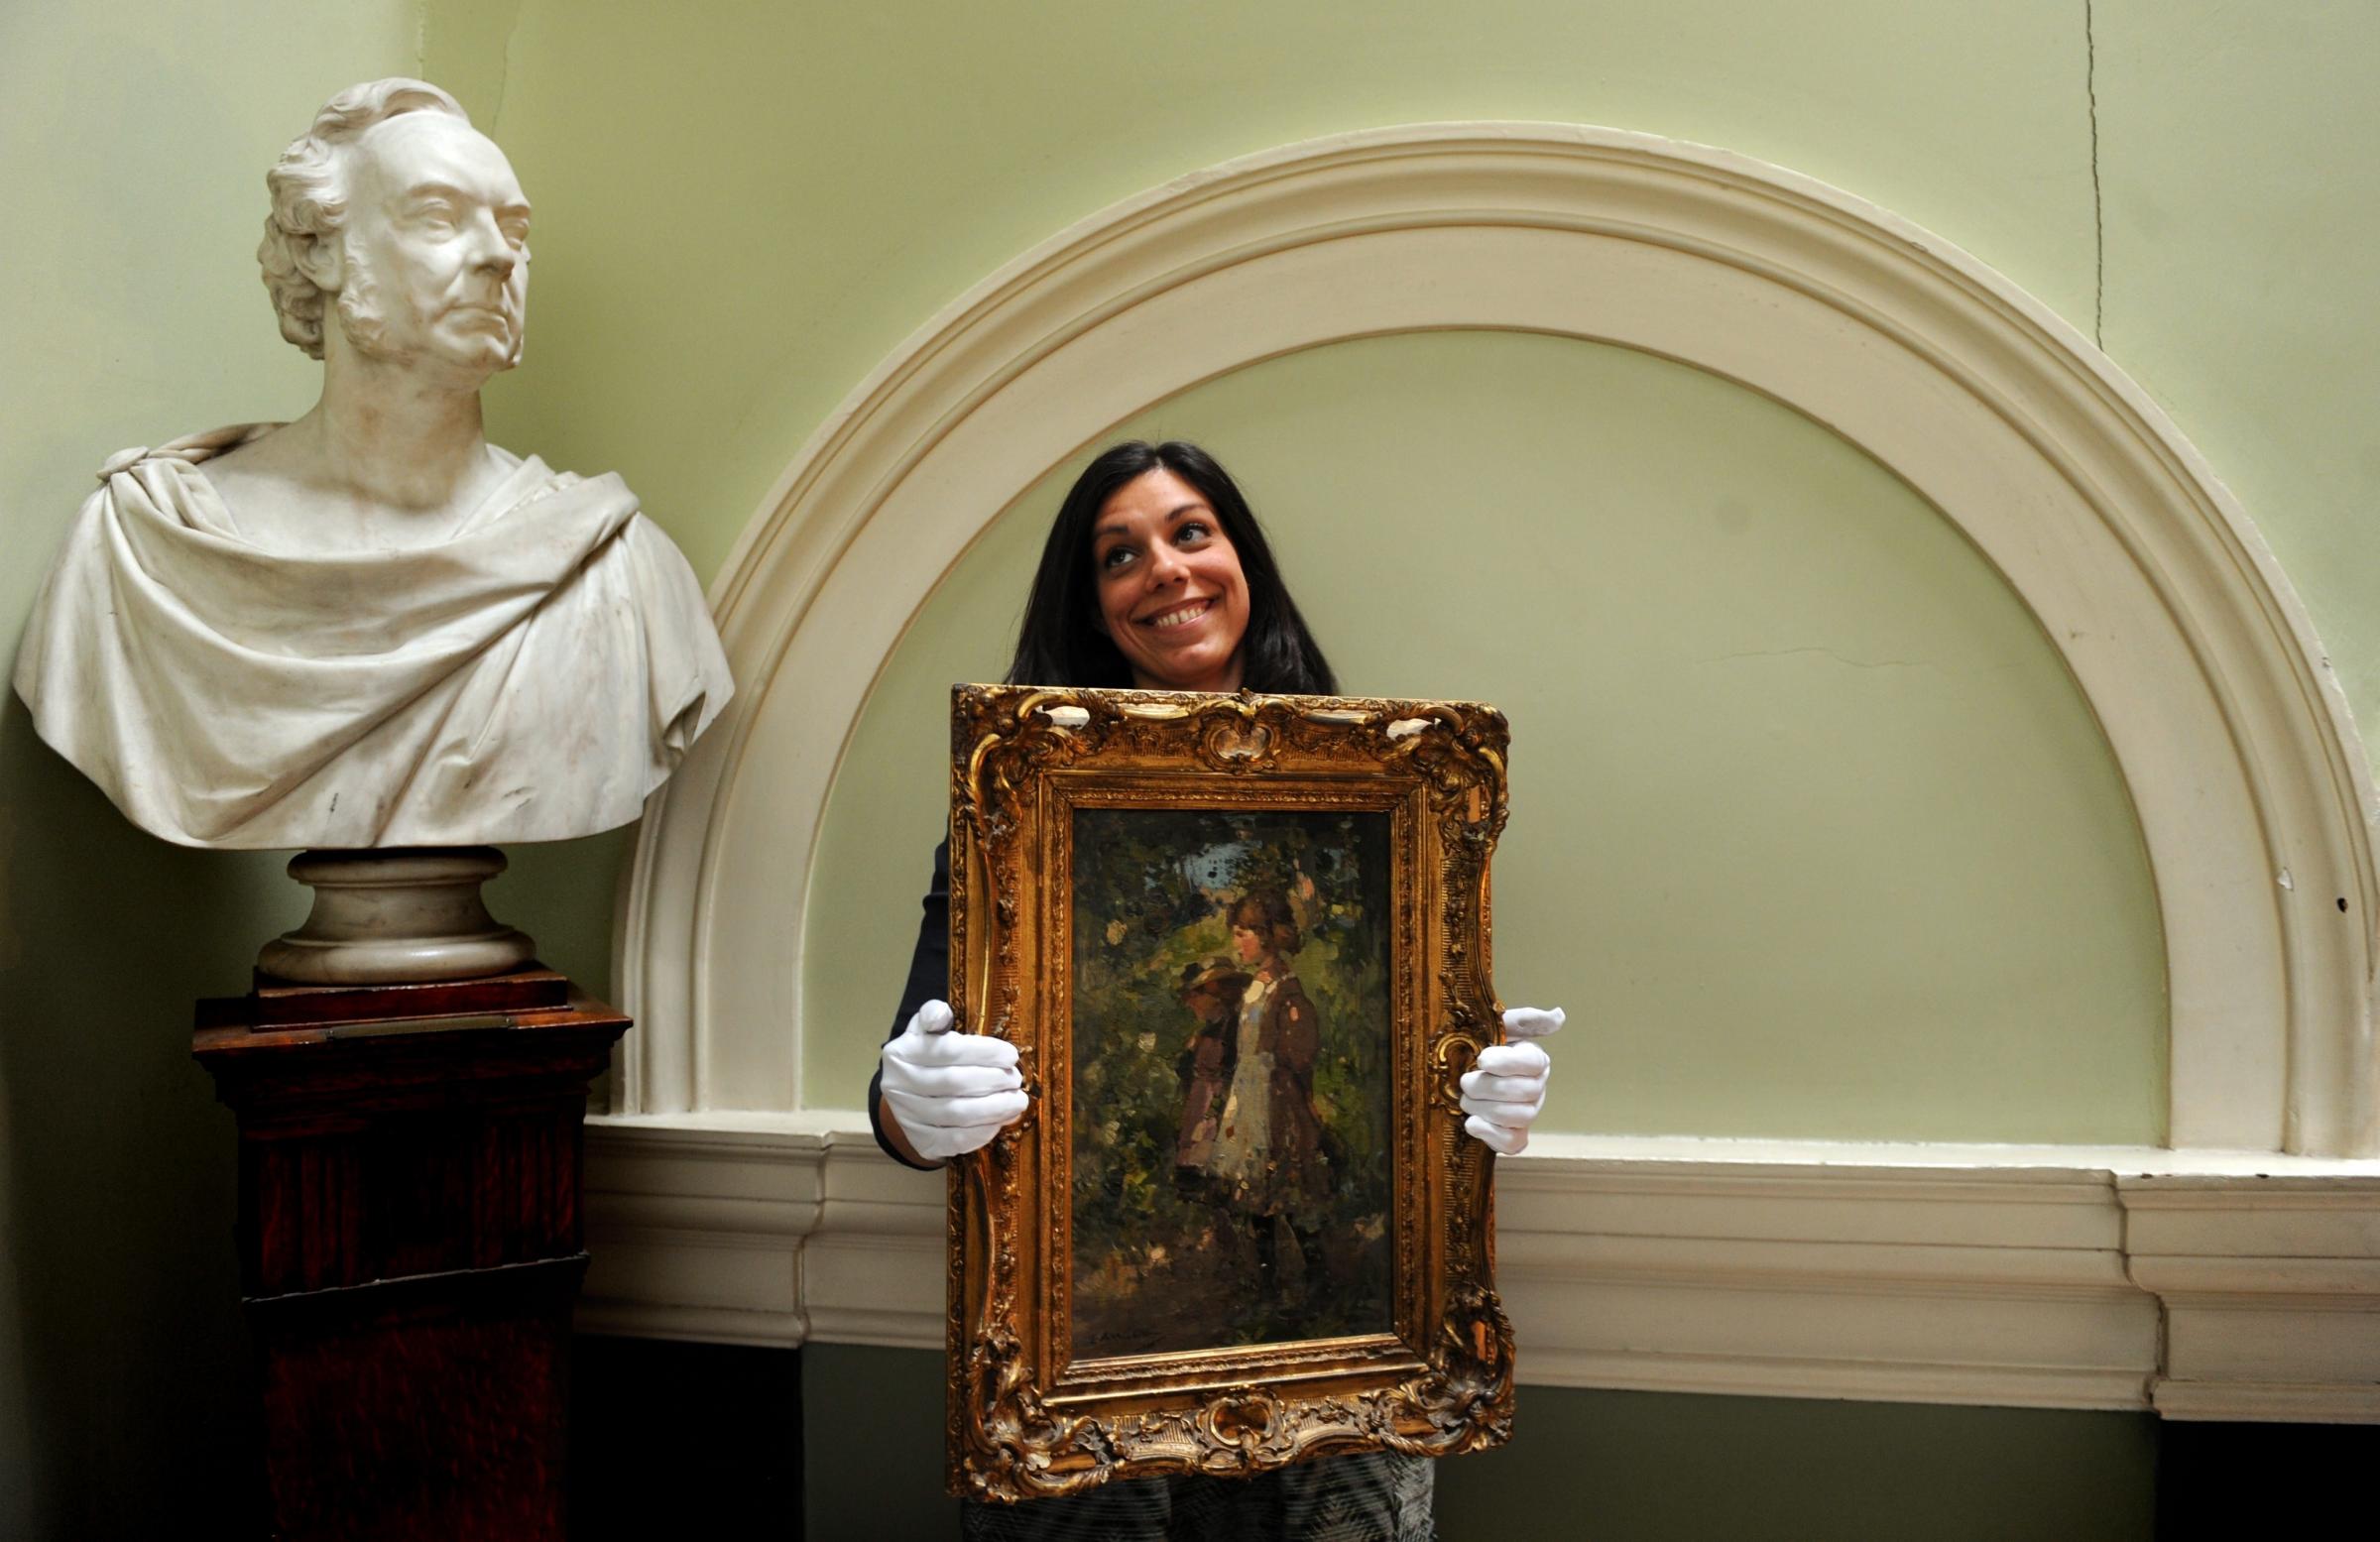 Glasgow Boys Paintings on view at The Royal Faculty of Procurators, Nelson Mandela Place Glasgow. Camillla Riva 27 from Milan holdind a Painting titled The Schoolmates by Edward Arthur Walton valued at £40-60,000. Pictures: Herald and Times